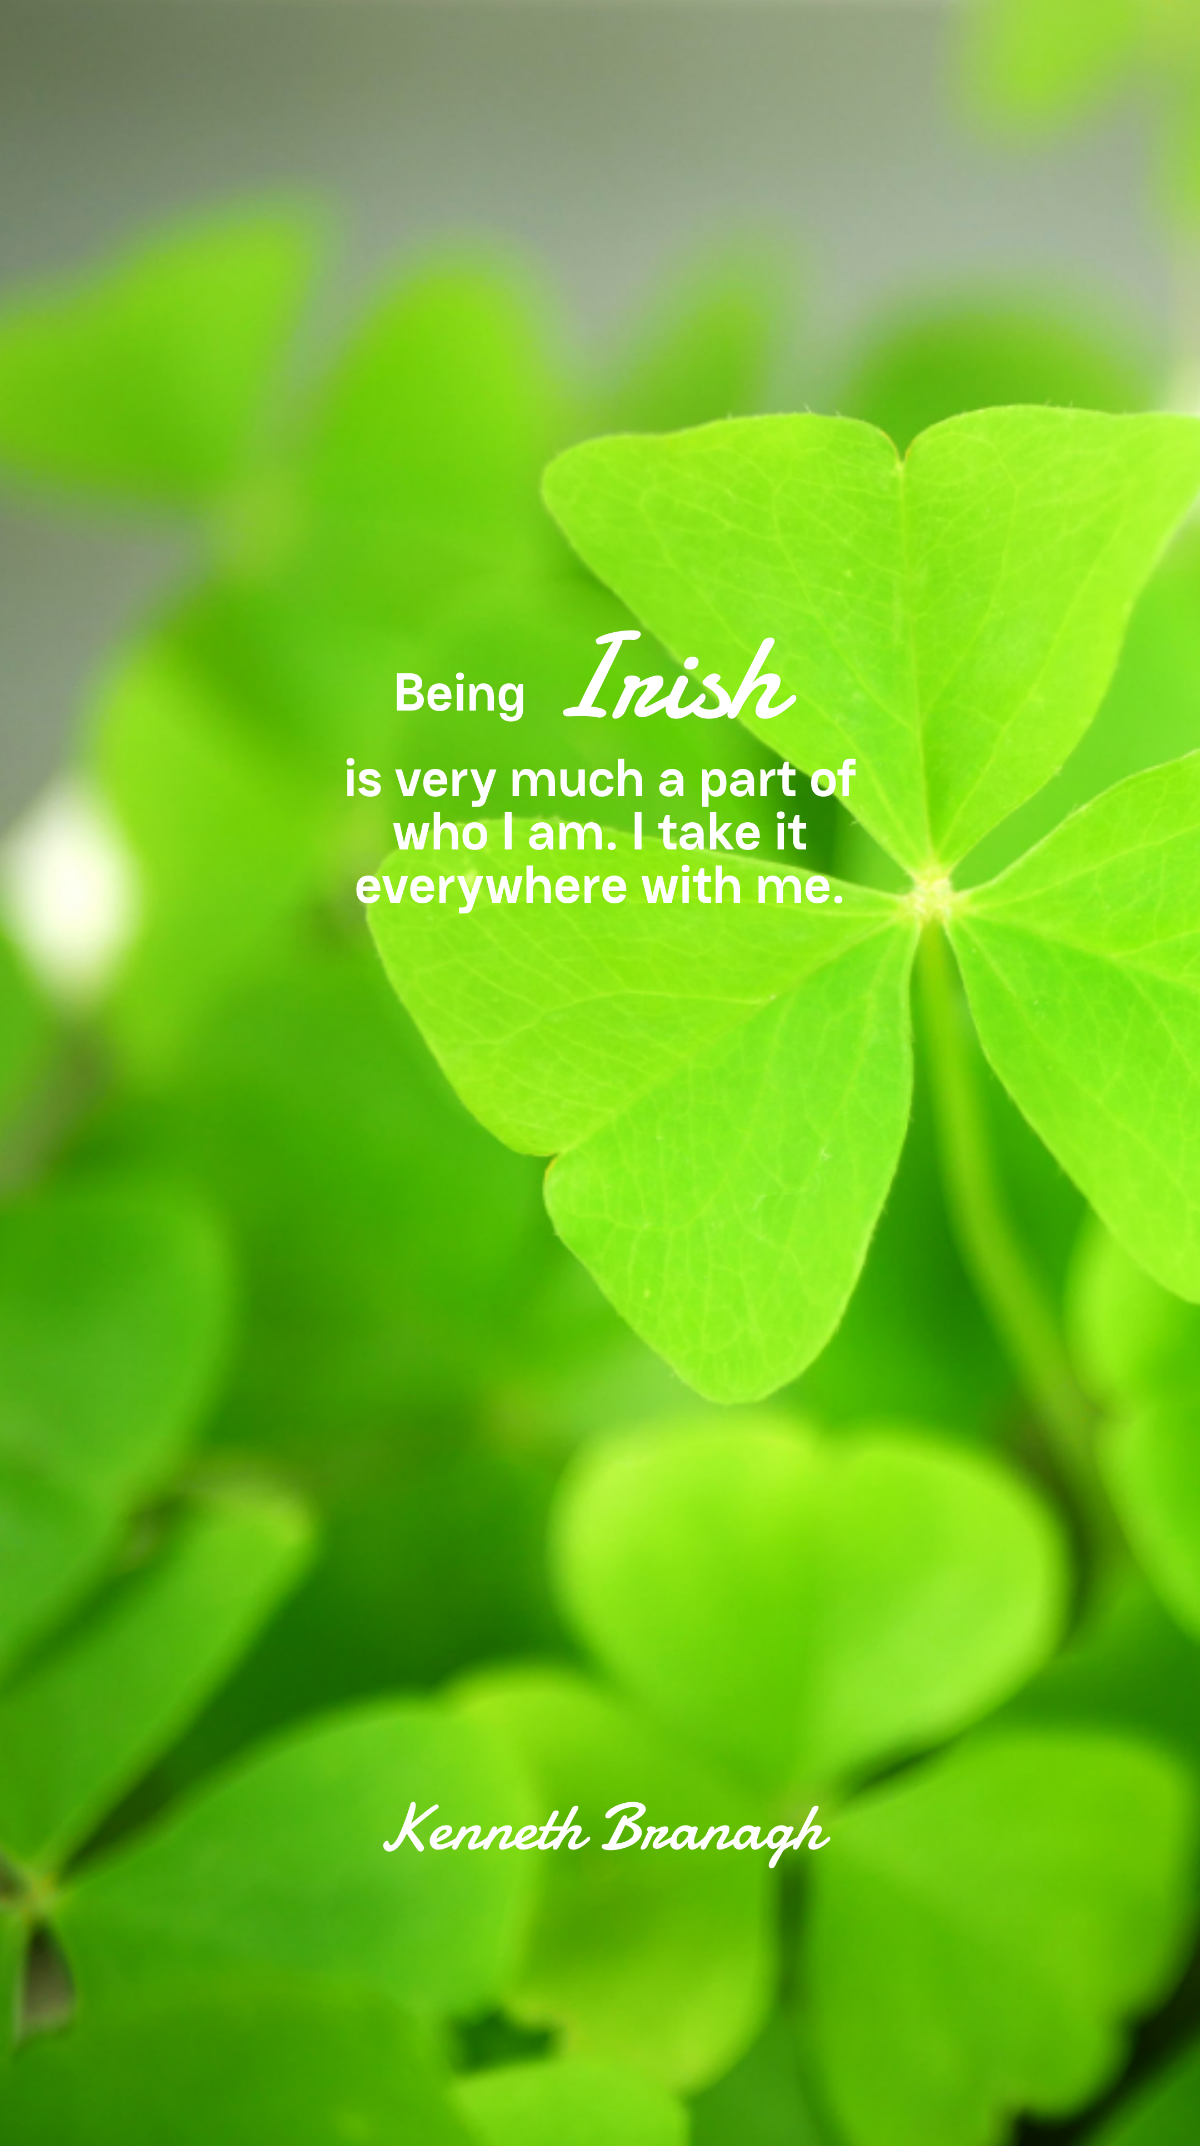 Kenneth Branagh - Being Irish, I always had this love of words. Template